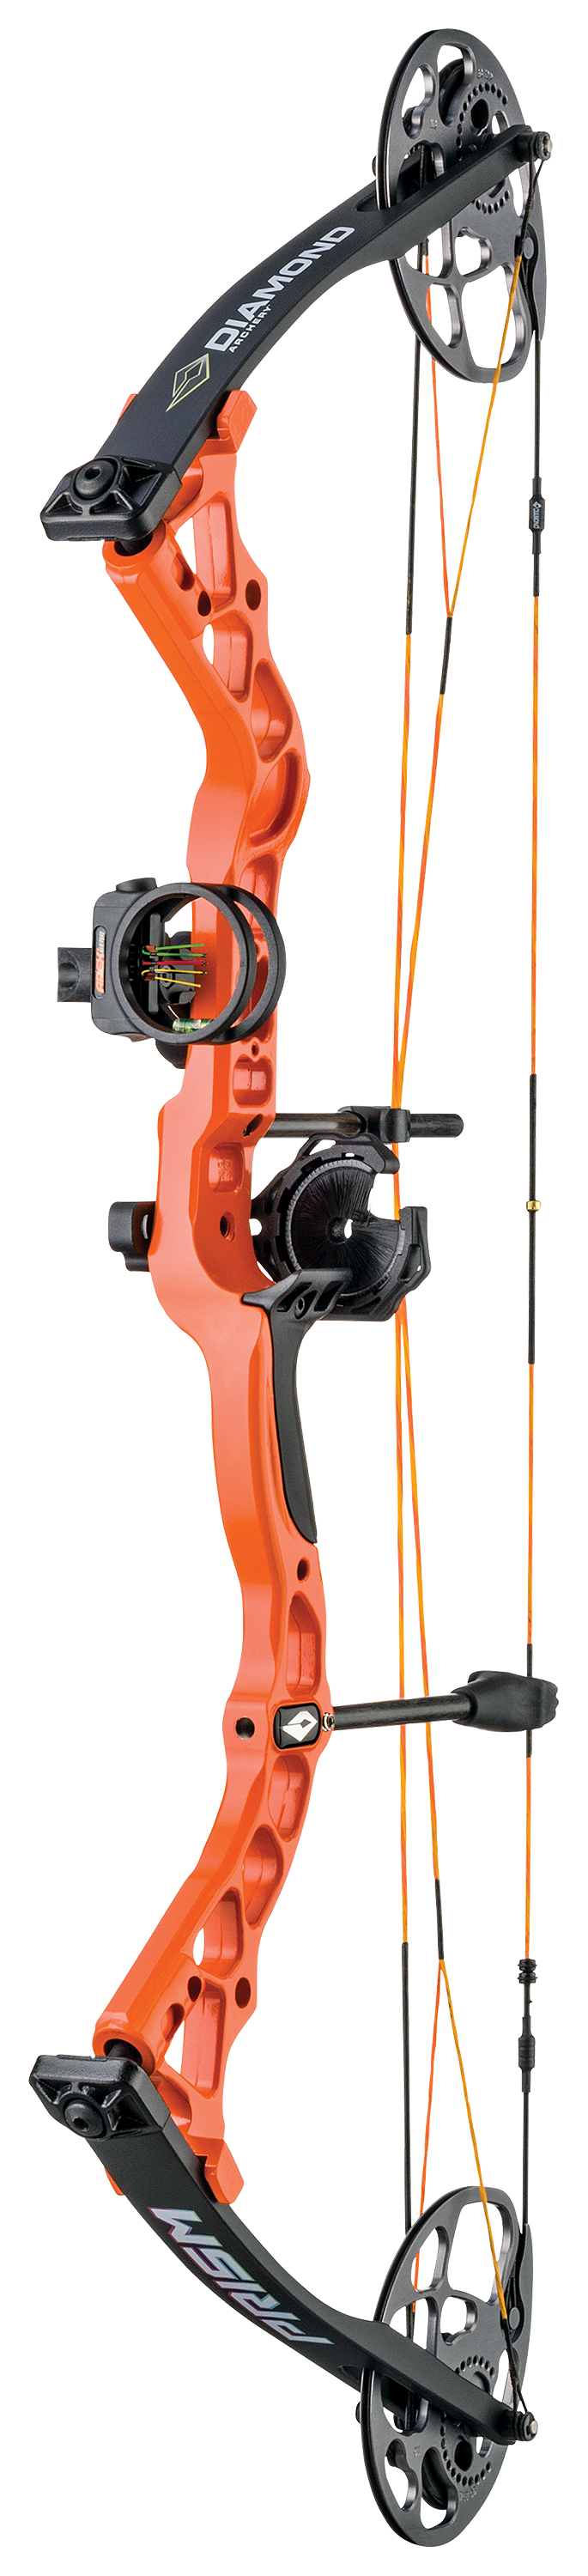 Diamond by Bowtech Prism Compound Bow Package - Right Hand - Bright Orange